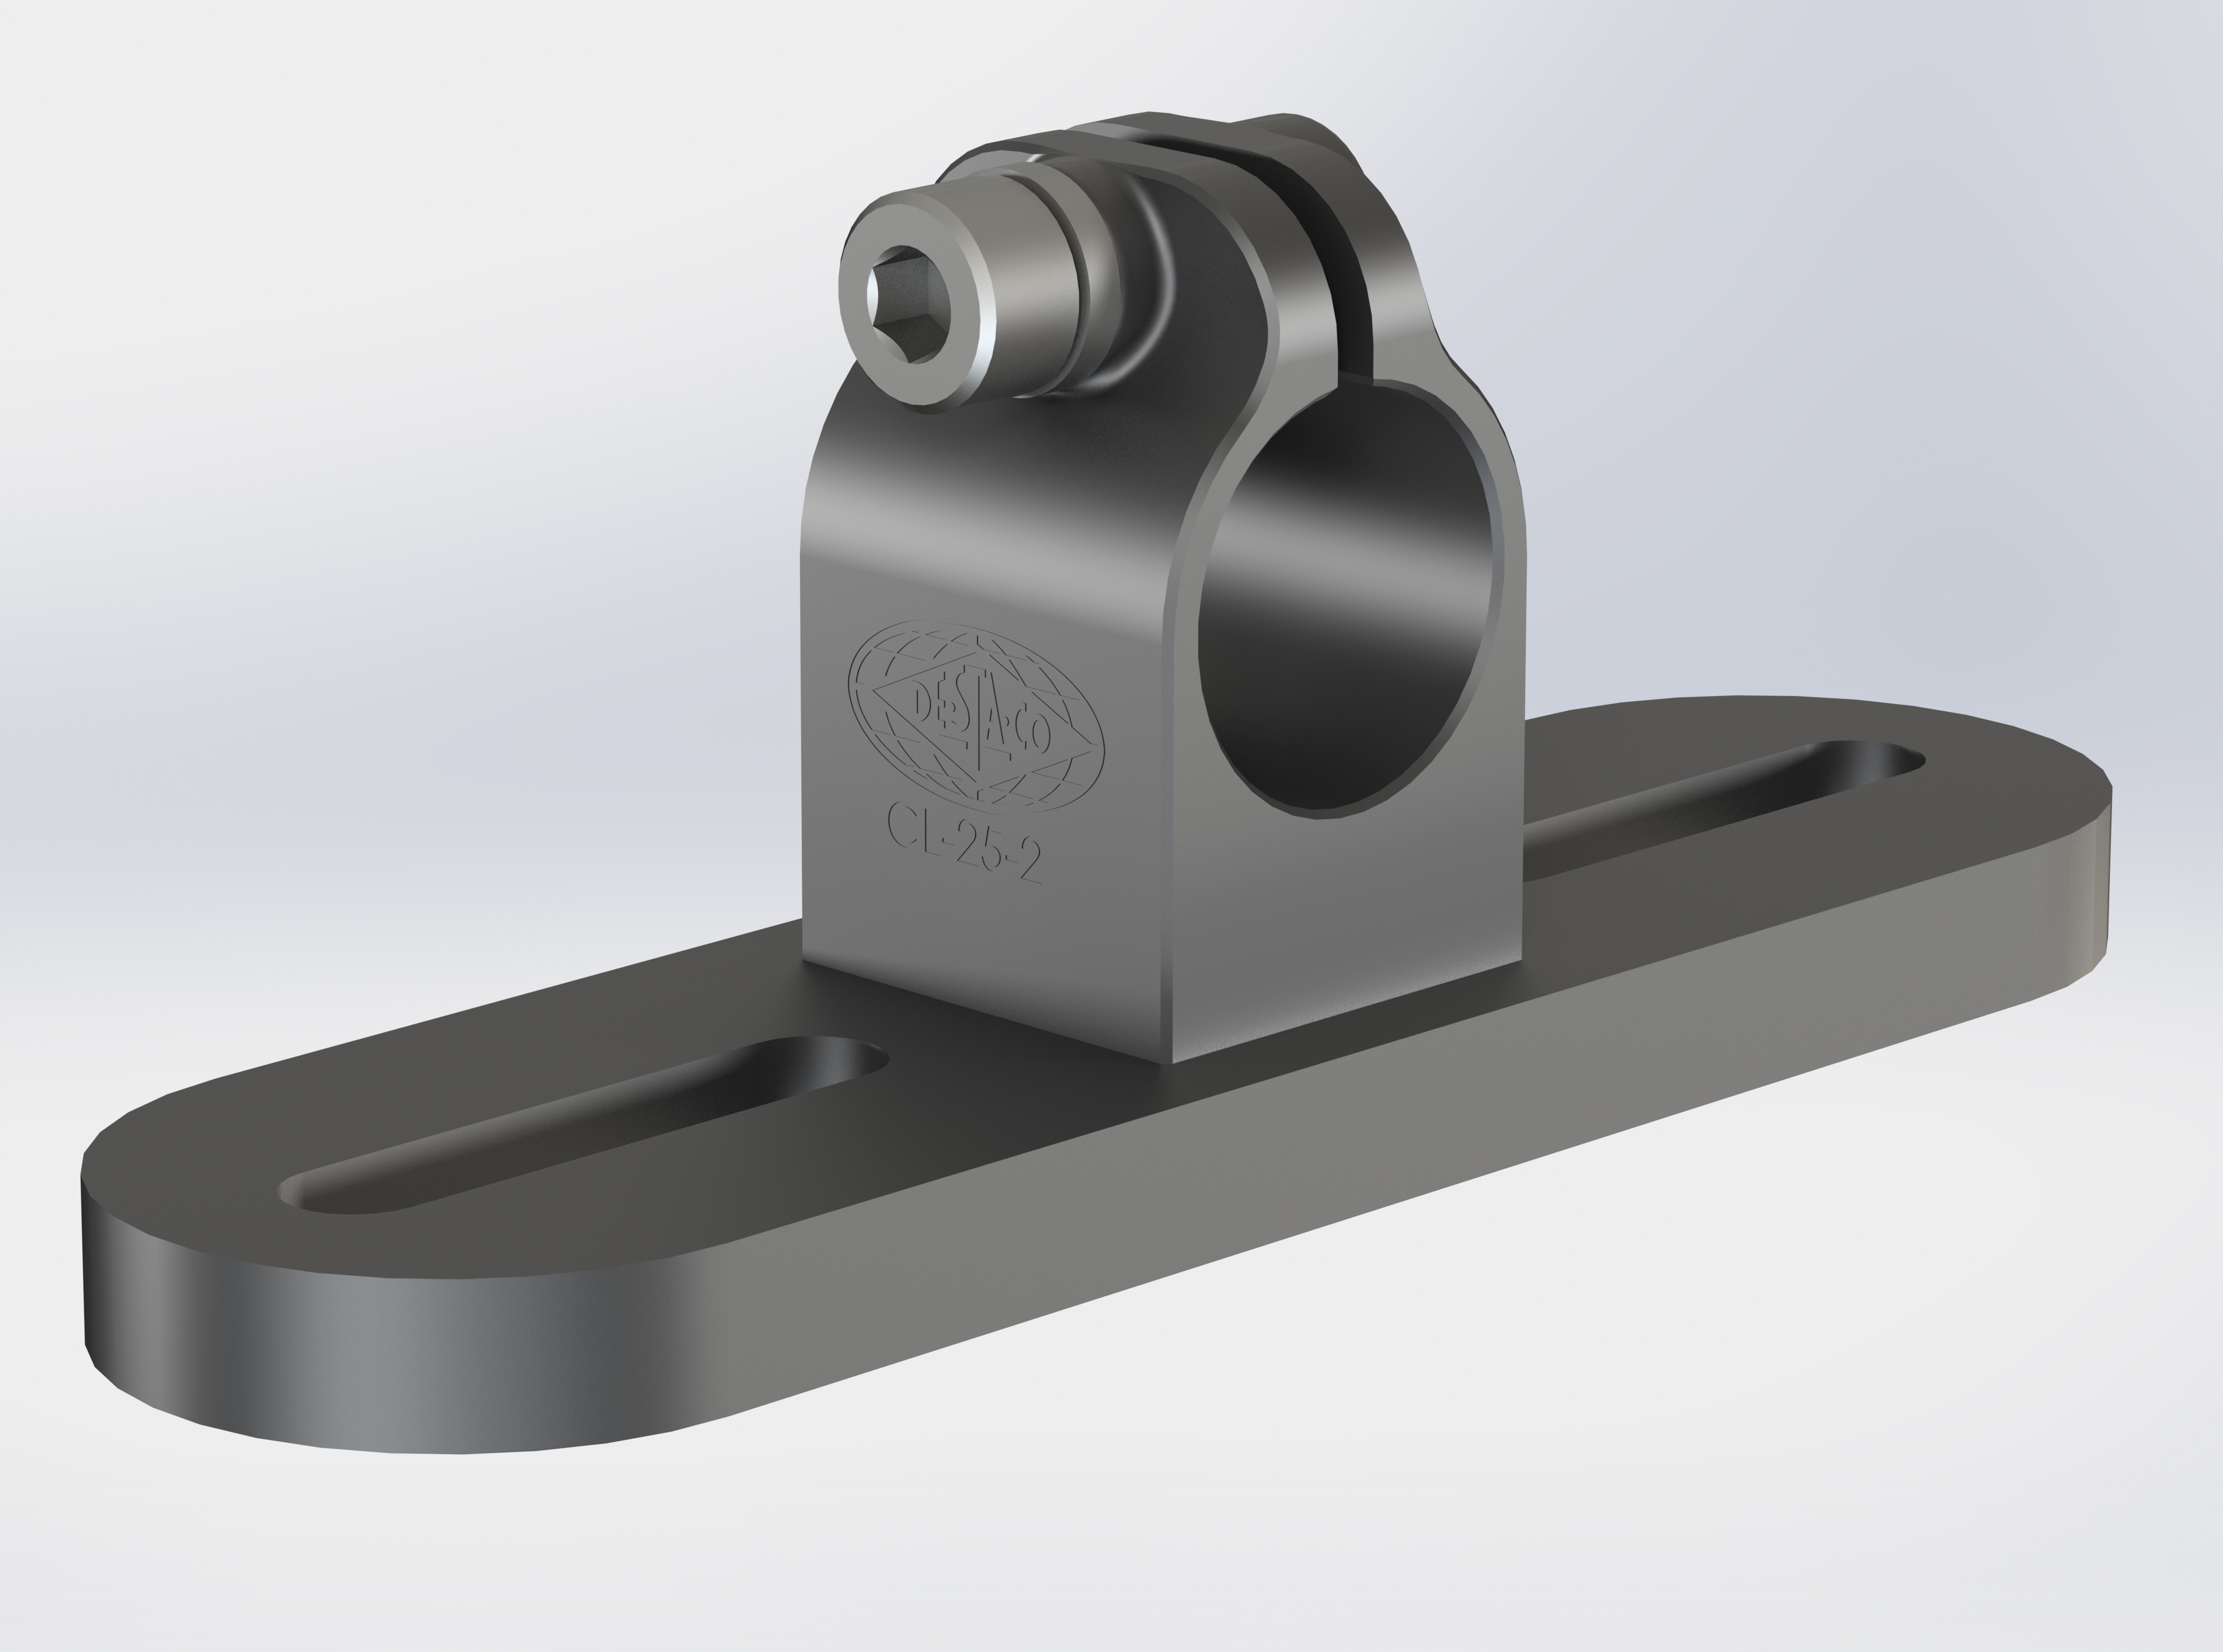 Destaco’s TPA Series of lightweight, transfer press adapters mount directly to removable, tri-axis transfer press rail extrusions.